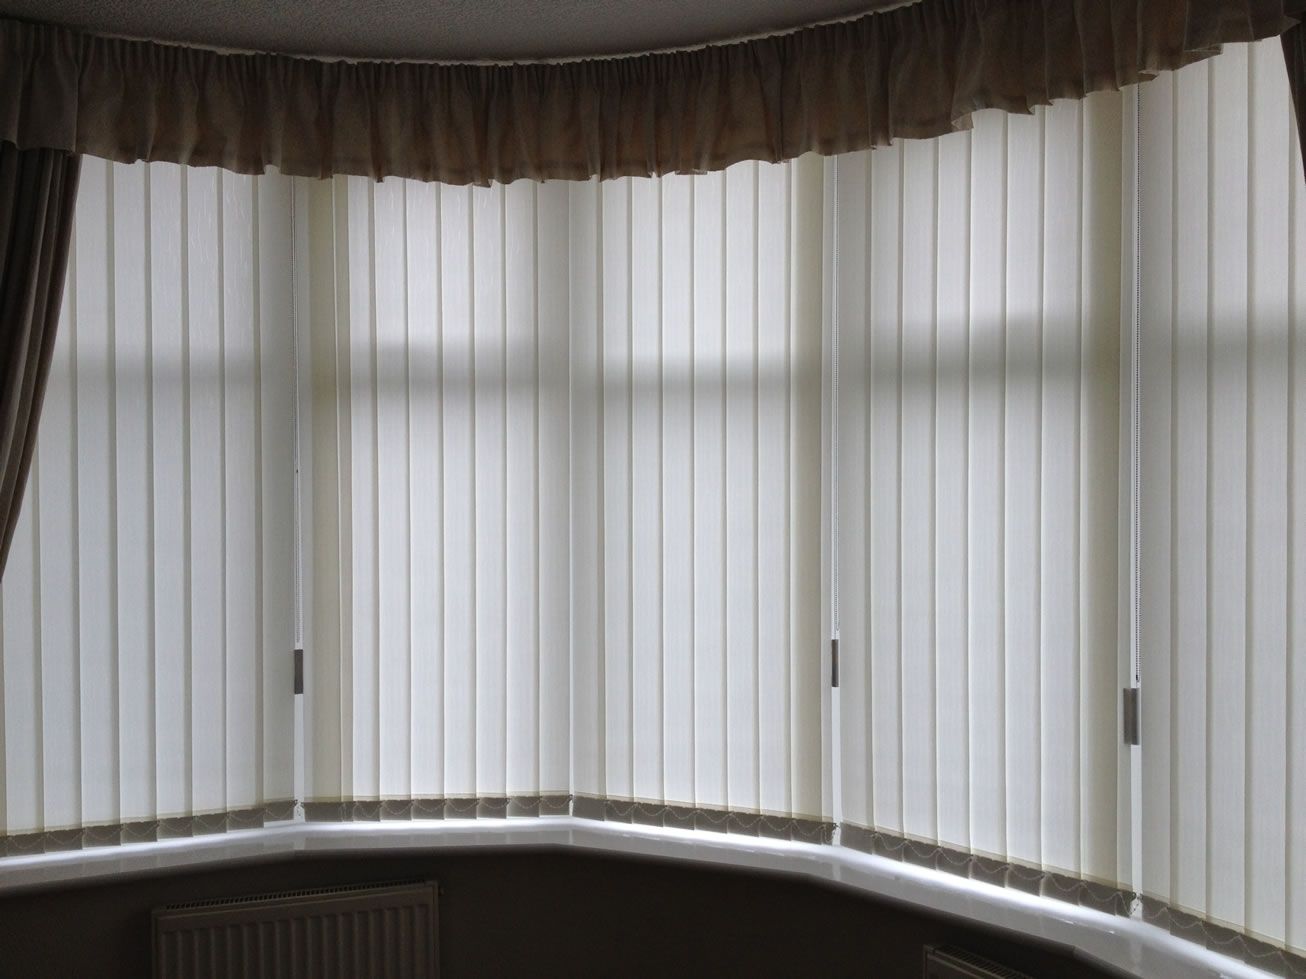 Curtains For Blinds For Bay Windows Afrozep Pertaining To Bay Window Blinds And Curtains (View 5 of 15)